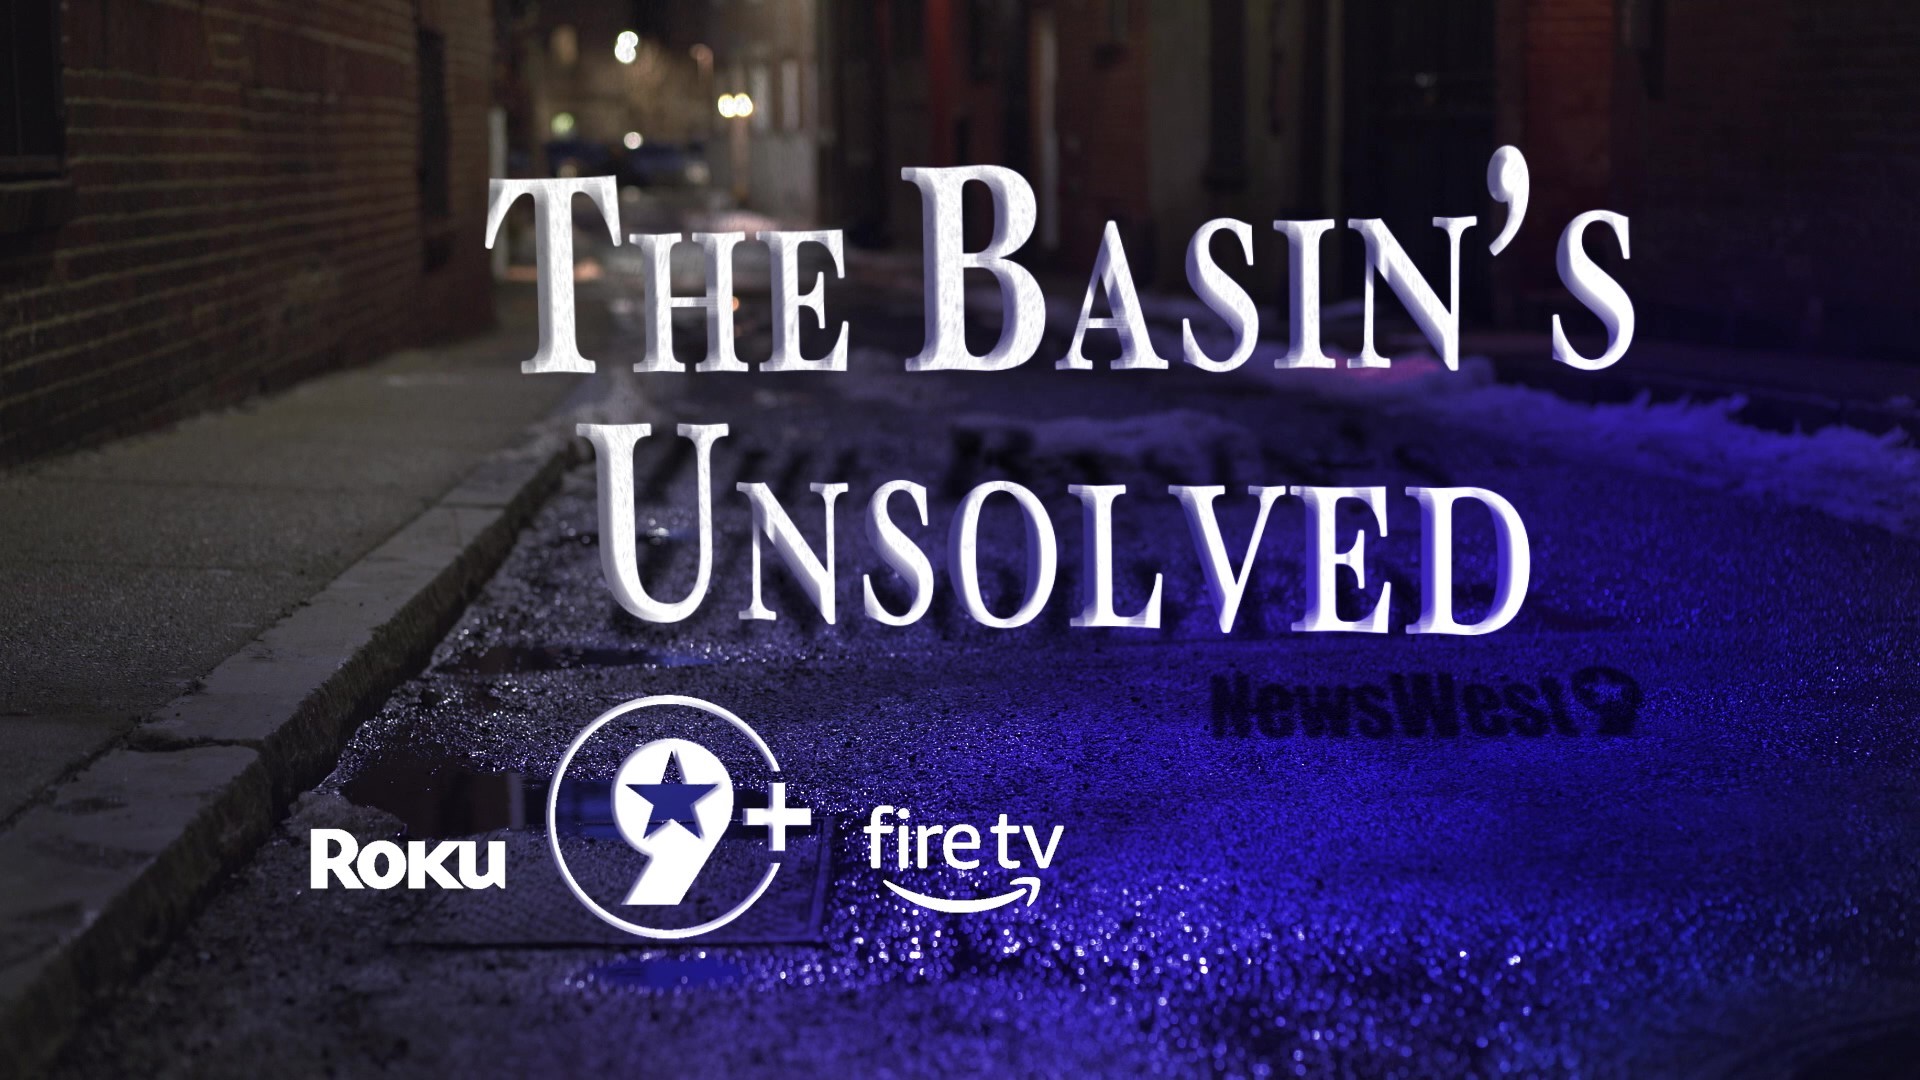 Relive the second season of the Basin's Unsolved!